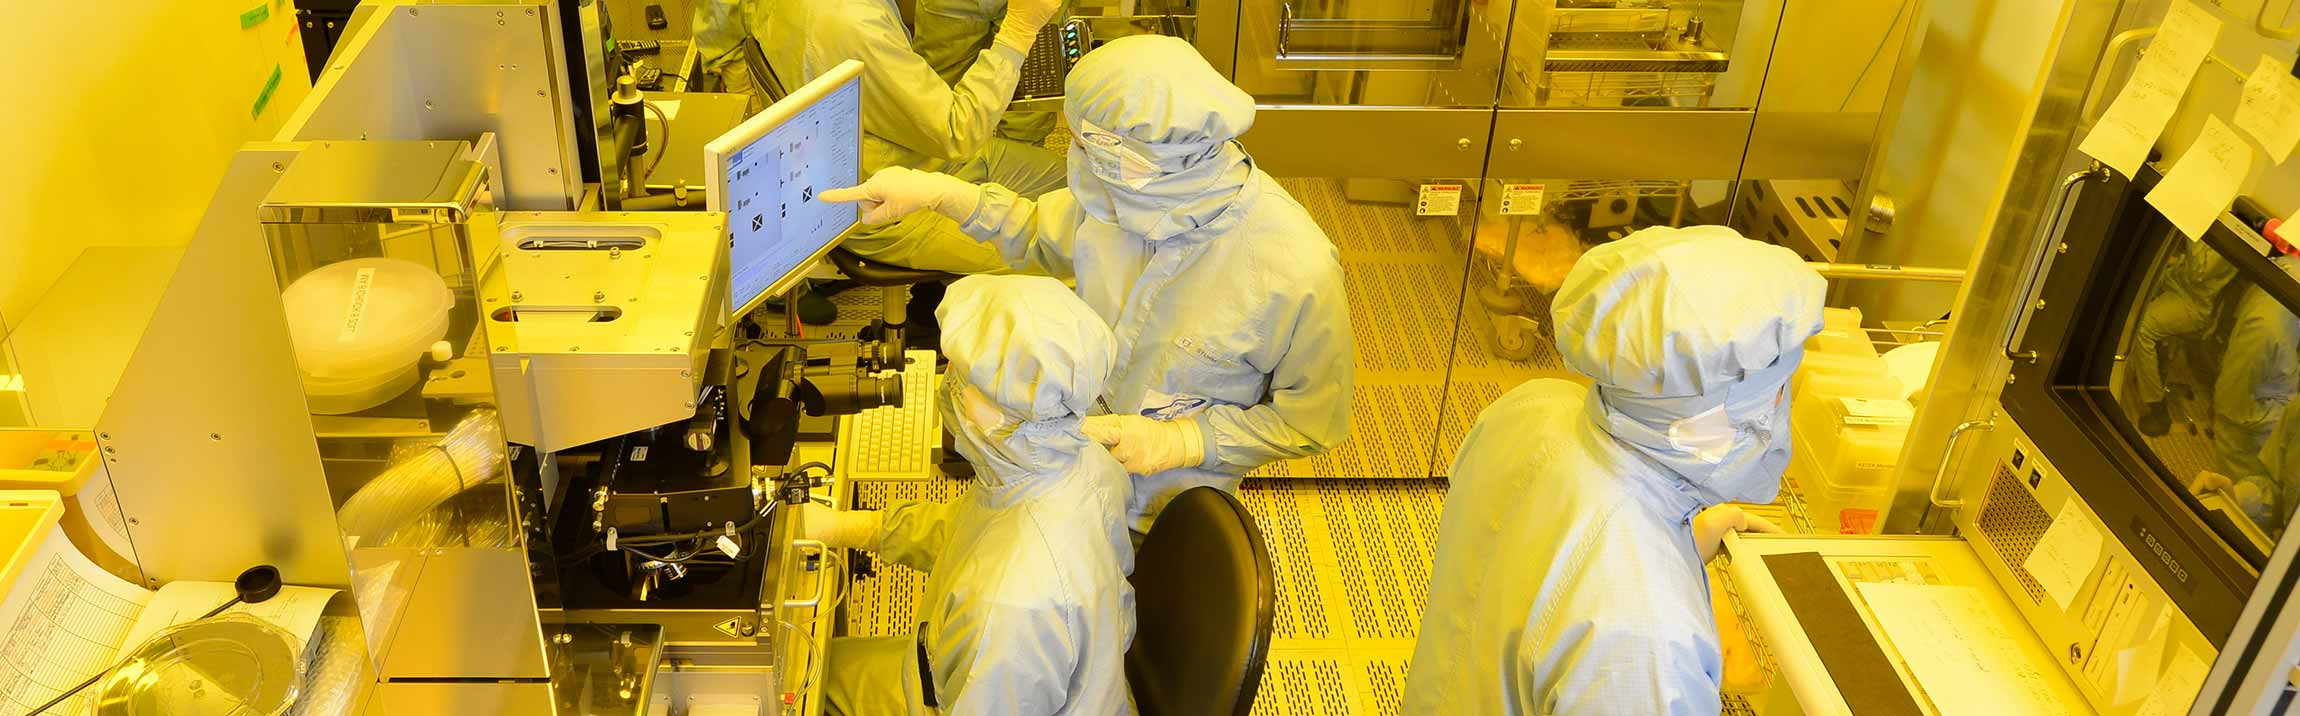 Fraunhofer EMFT employees in a clean room for microsystems technology and sensor technology